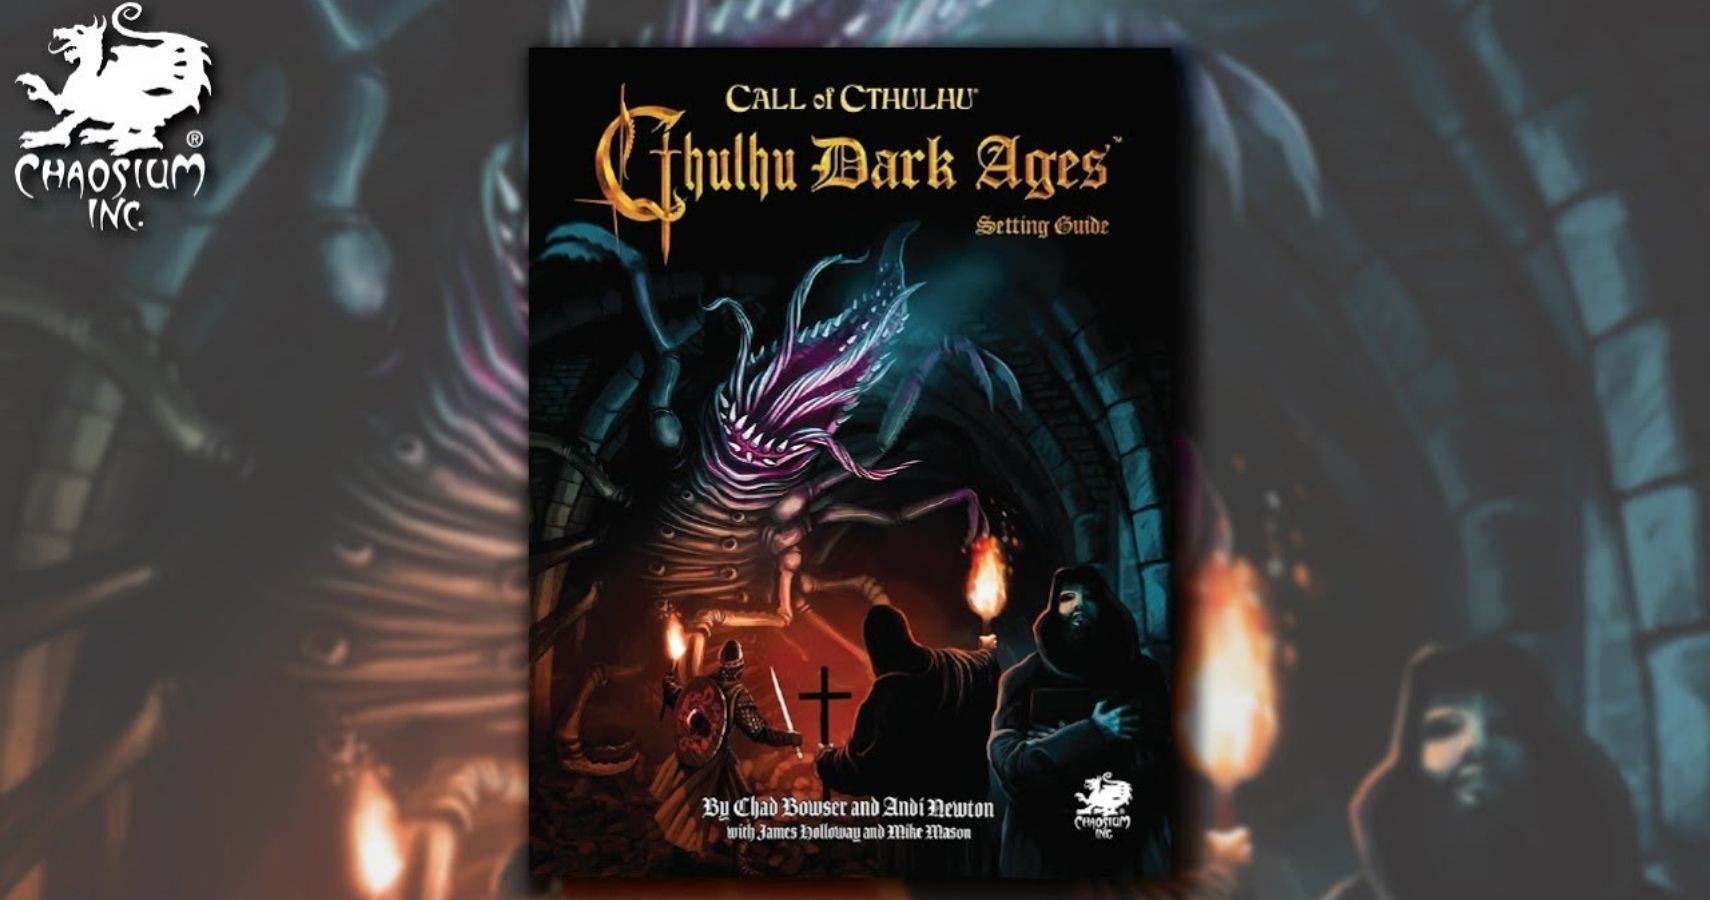 Call of Cthulhu Dark Ages Free Downloads feature image